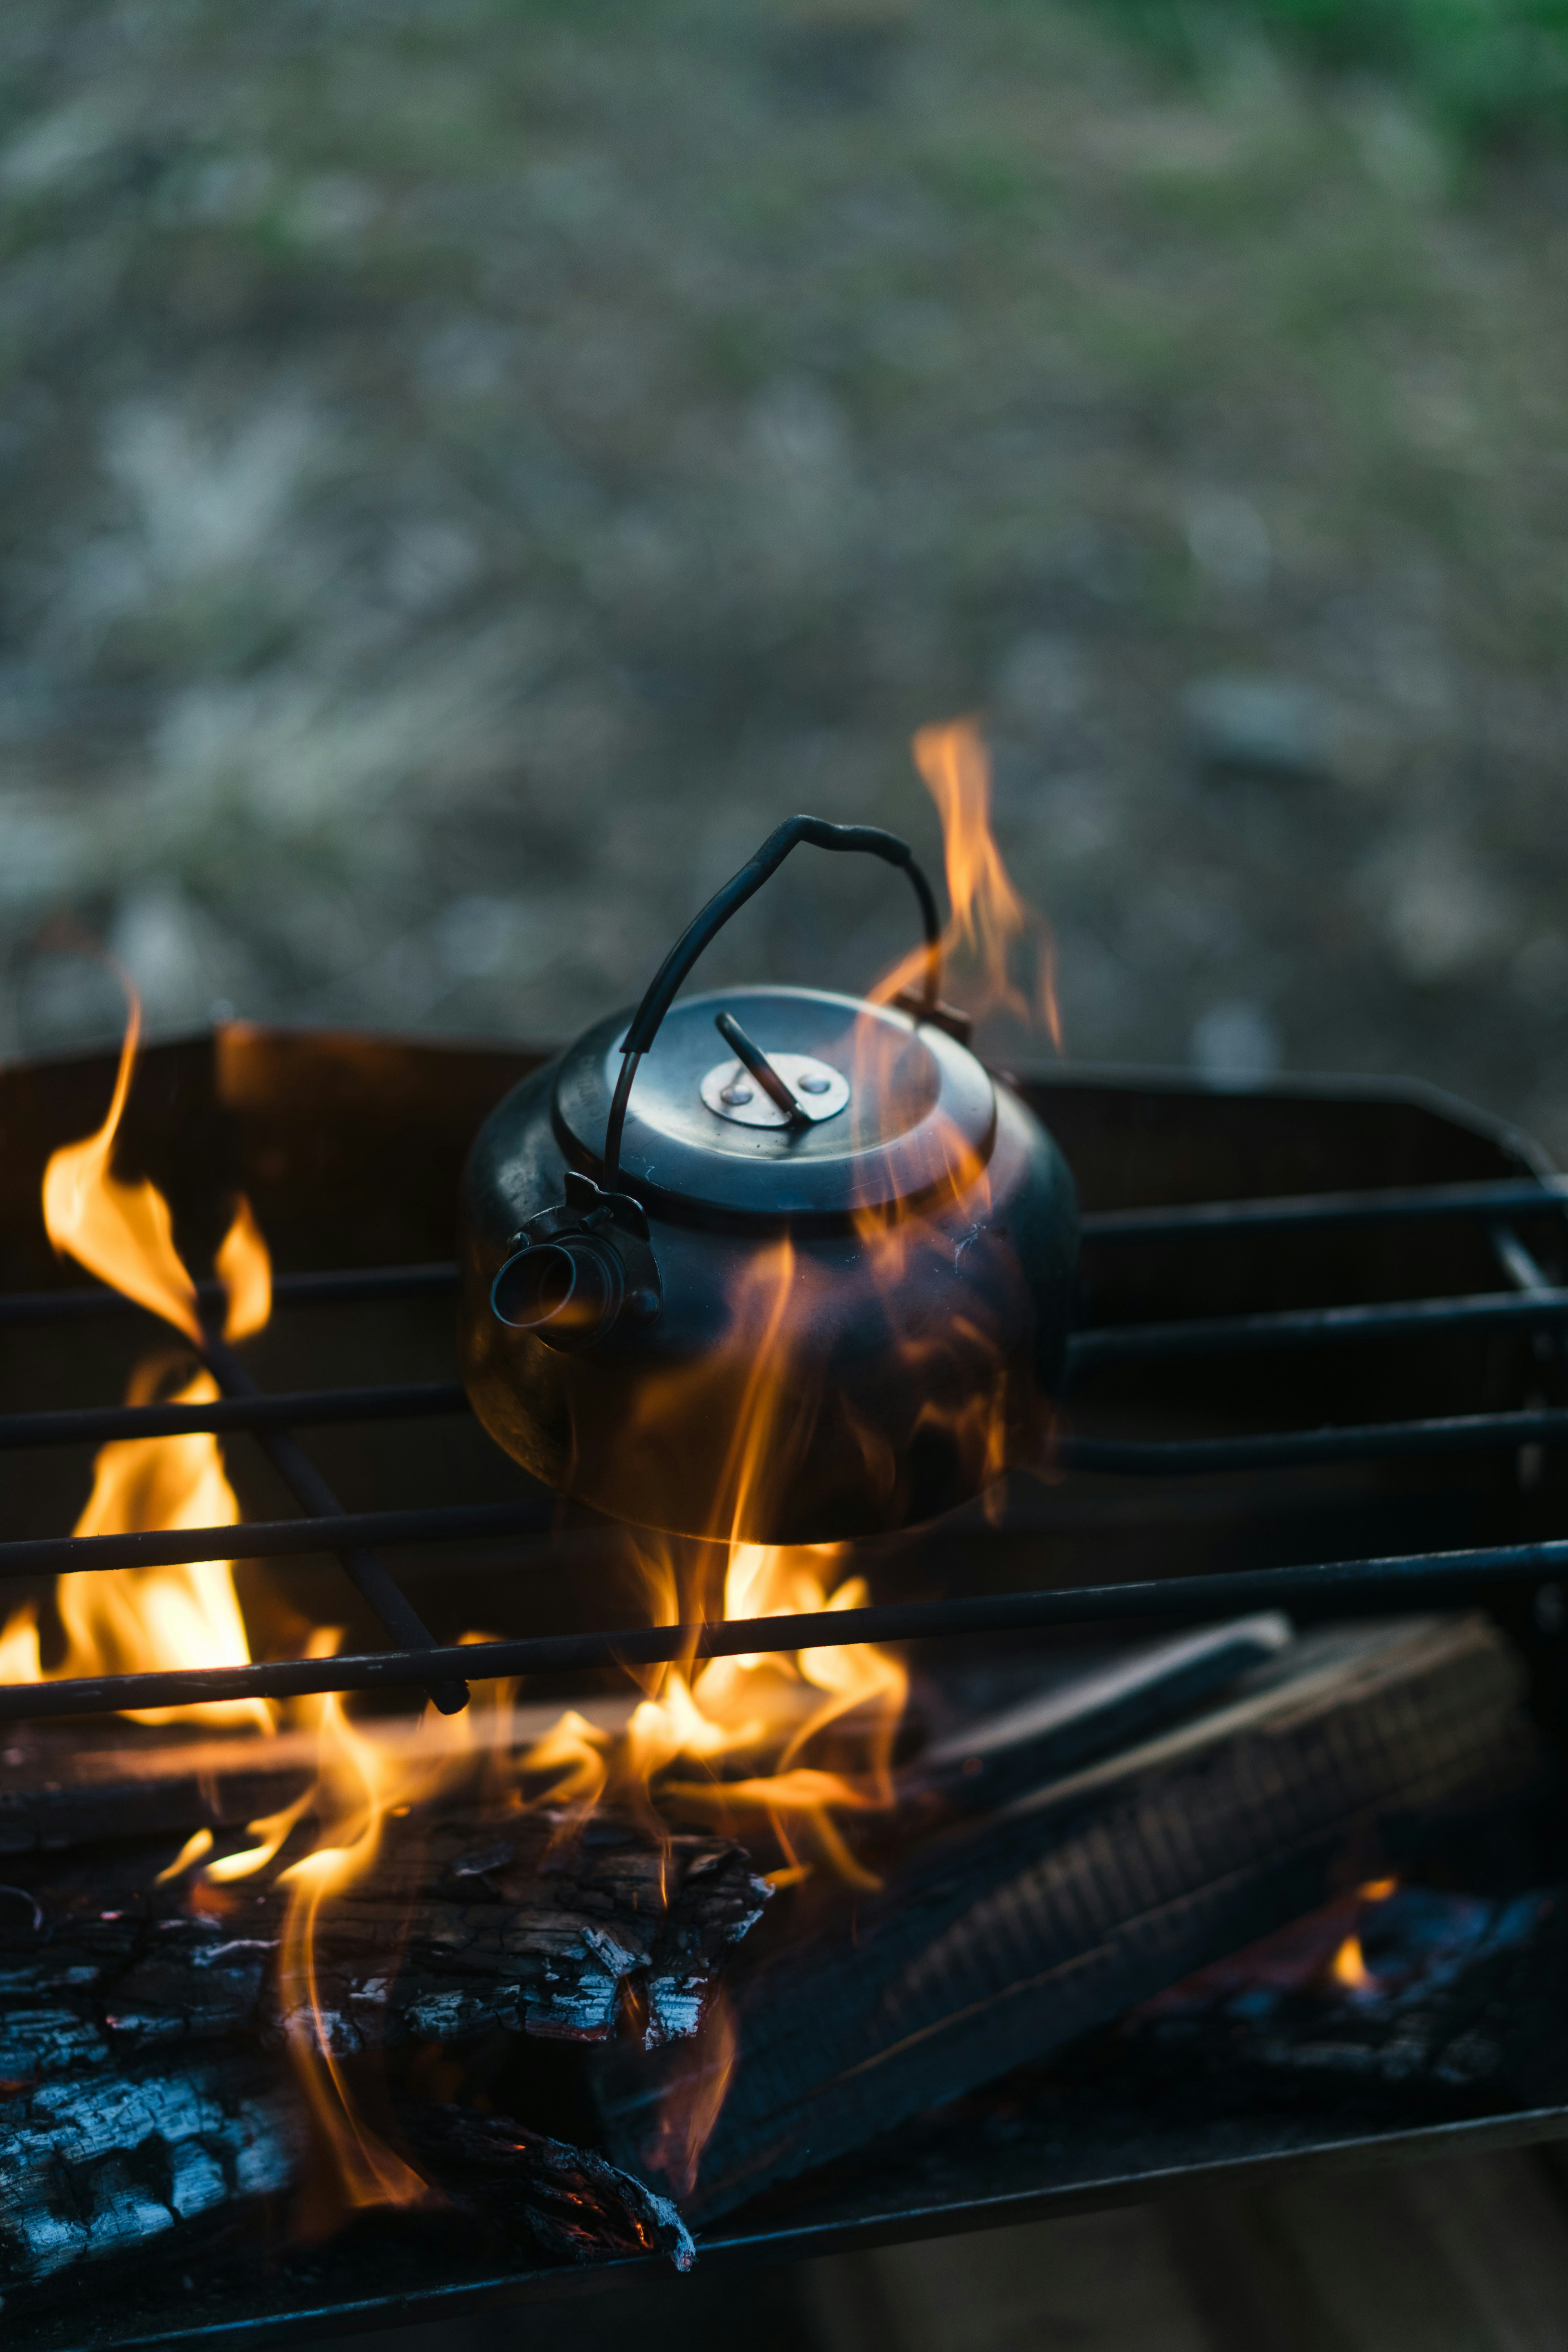 black-and-silver-portable-stove-on-fire